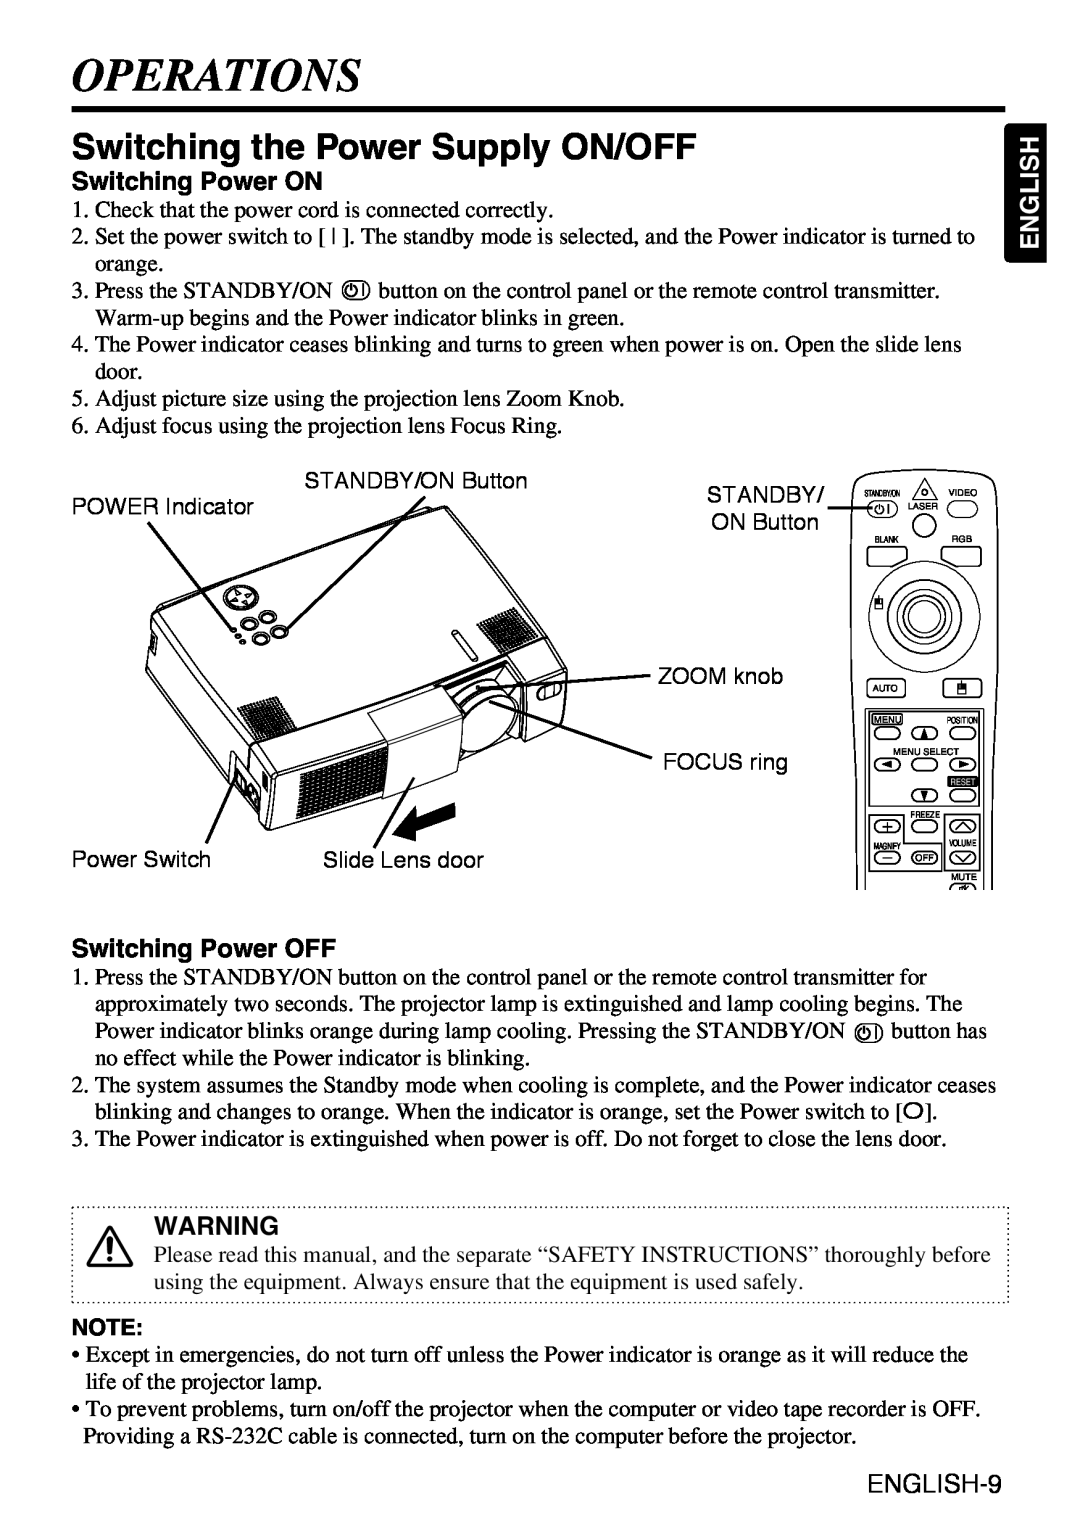 Grundig CP-731i user manual Operations, Switching the Power Supply ON/OFF, Switching Power ON, Switching Power OFF, English 